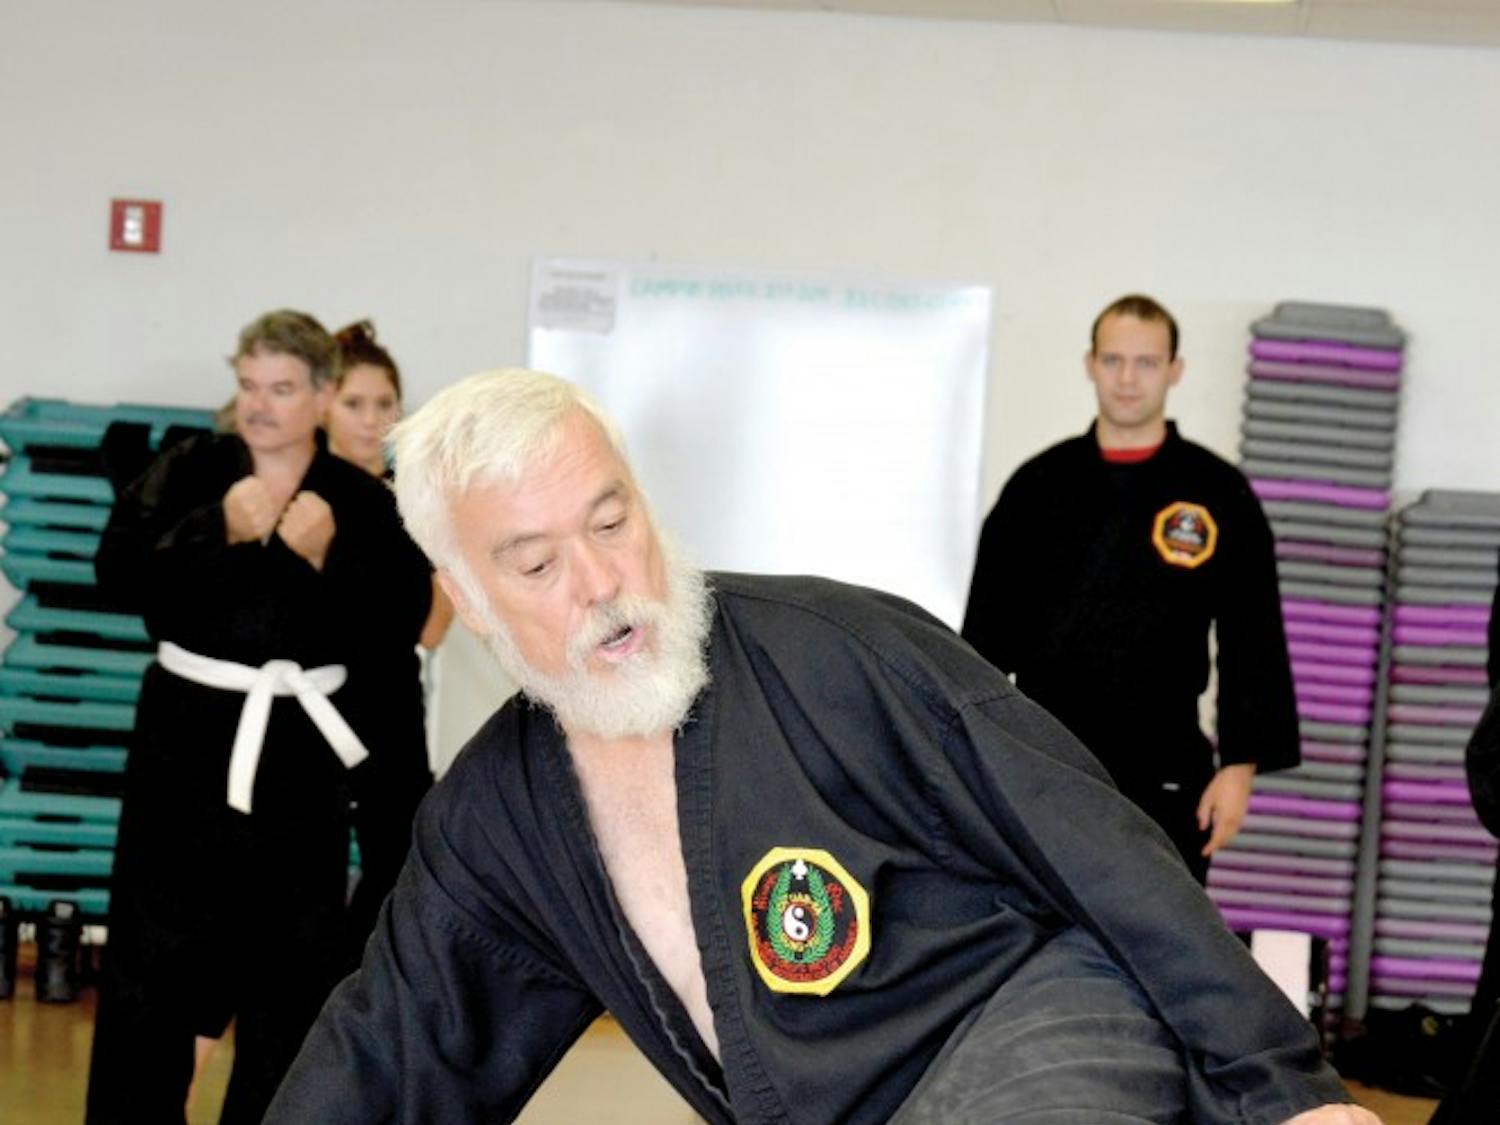 According to Merriam-Webster dictionary, martials arts are  “one of several forms of fighting and self-defense (such as karate and judo) that are widely practiced as sports.”Daniel Melcor Chavez, a karate instructor in the Health, Exercise and Sports Science Department, said that martial arts aren’t about fighting, they’re about developing a way of life.“Martial arts isn’t just kicking and punching. There is a lot more respect and self-esteem involved,” he said.Andrew Mooneyhan, program specialist for Health, Exercise, and Sports Science, said that structure is important for students who lack discipline.“We have it so that students can take these physical activity classes to be able to experience a structured activity or sport,” he said. ~ Imani Lambert